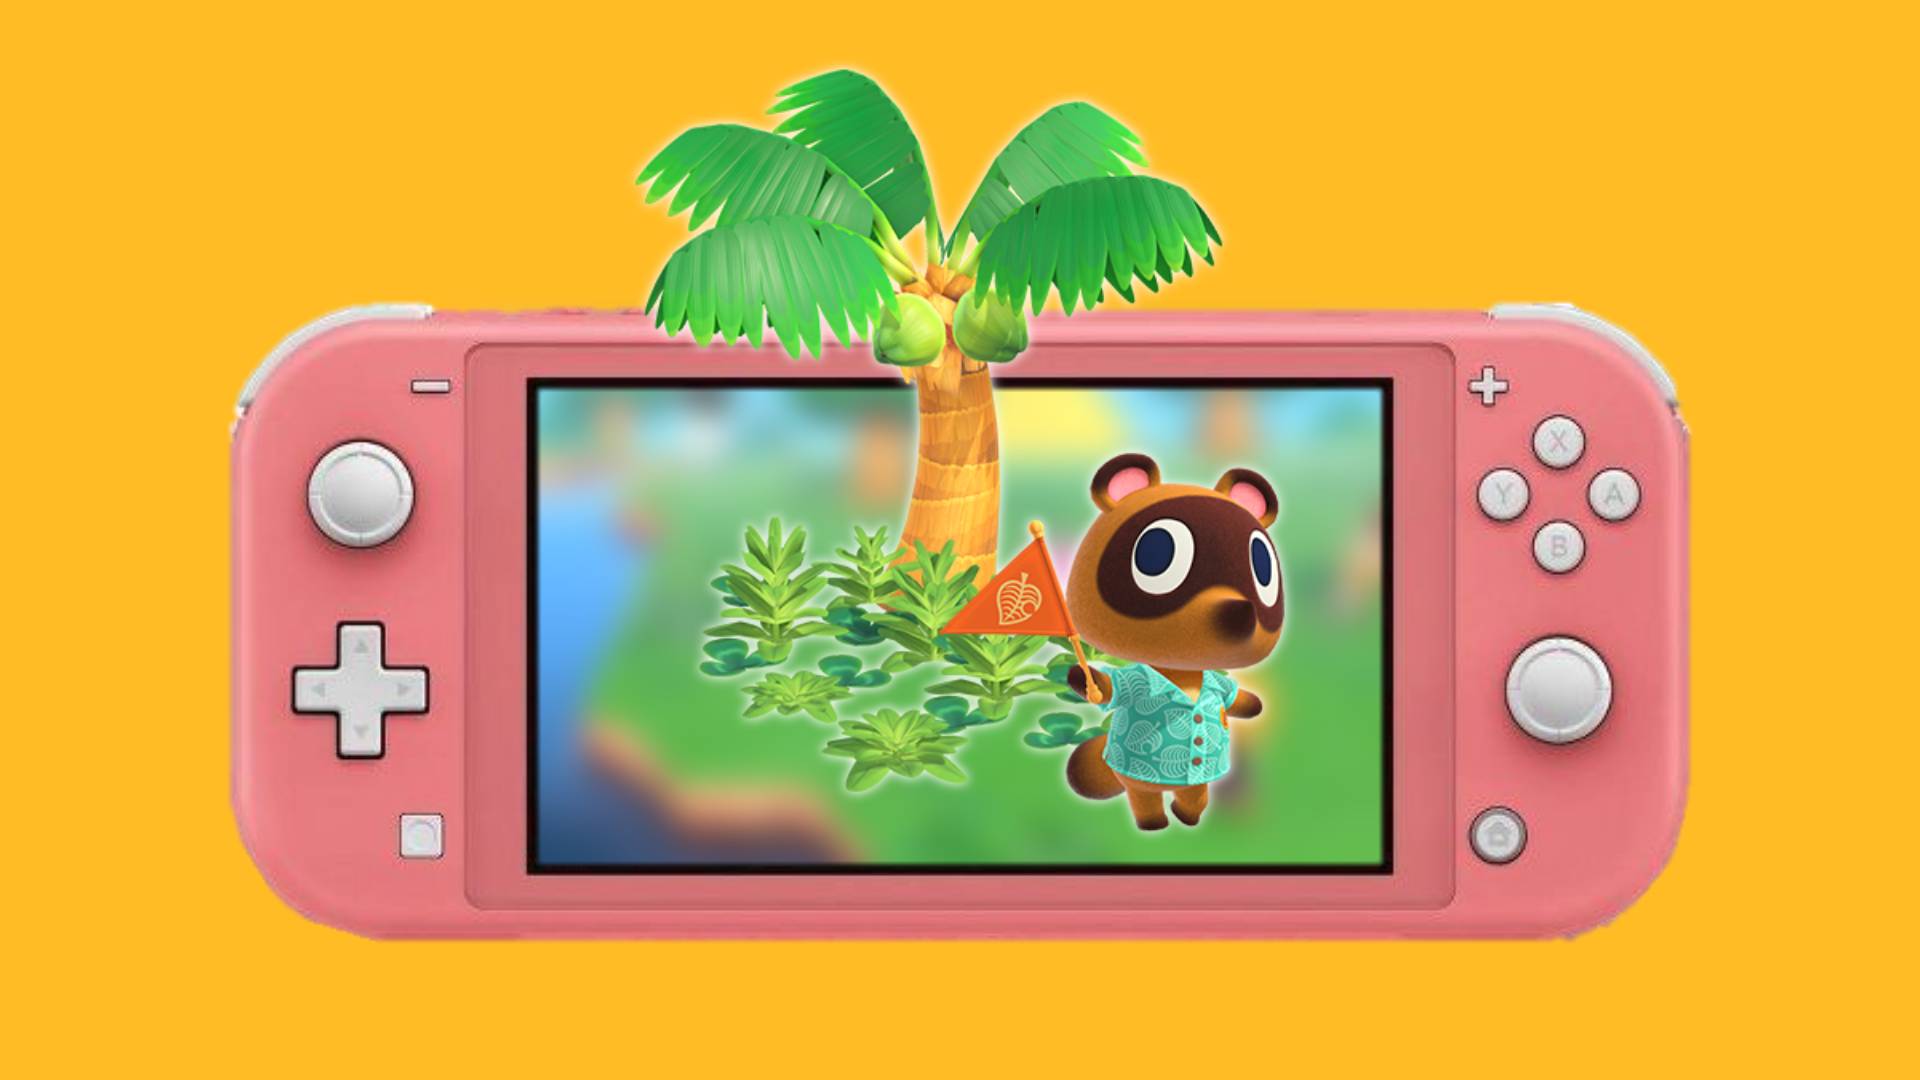 Get your bells ready Lite for cute a new Switch Animal Crossing